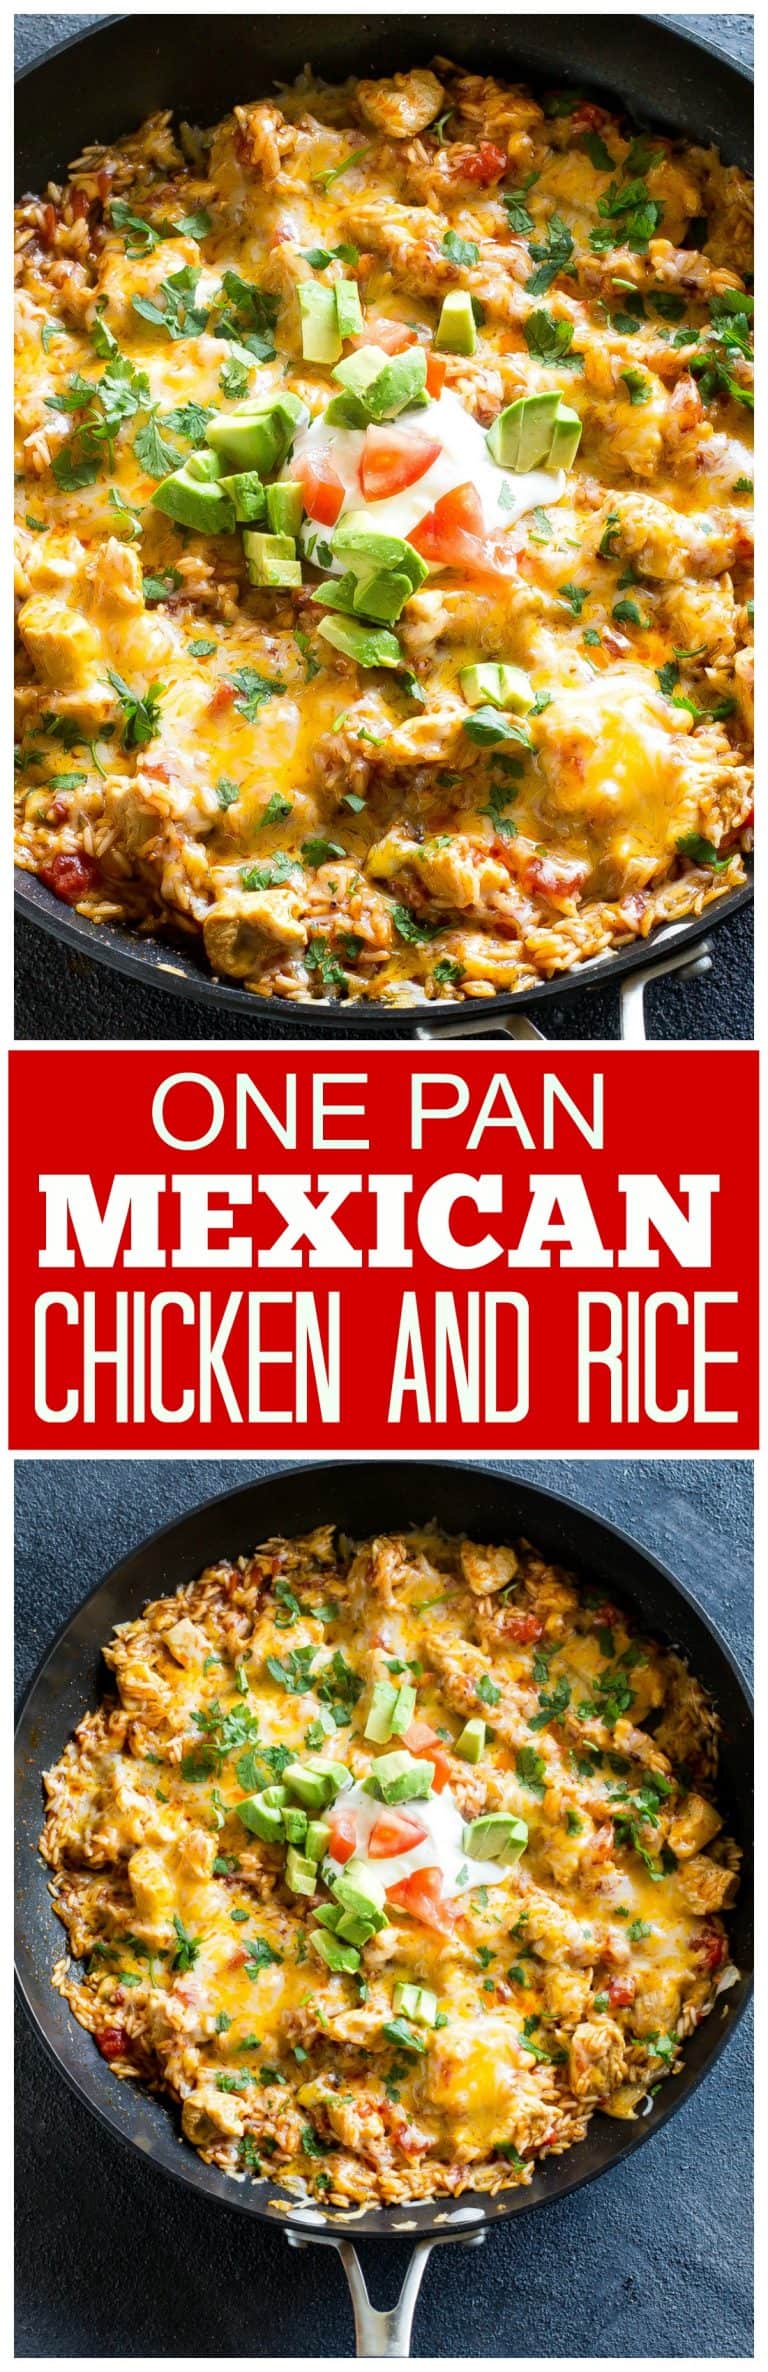 One Pan Mexican Chicken and Rice (+VIDEO) - The Girl Who Ate Everything